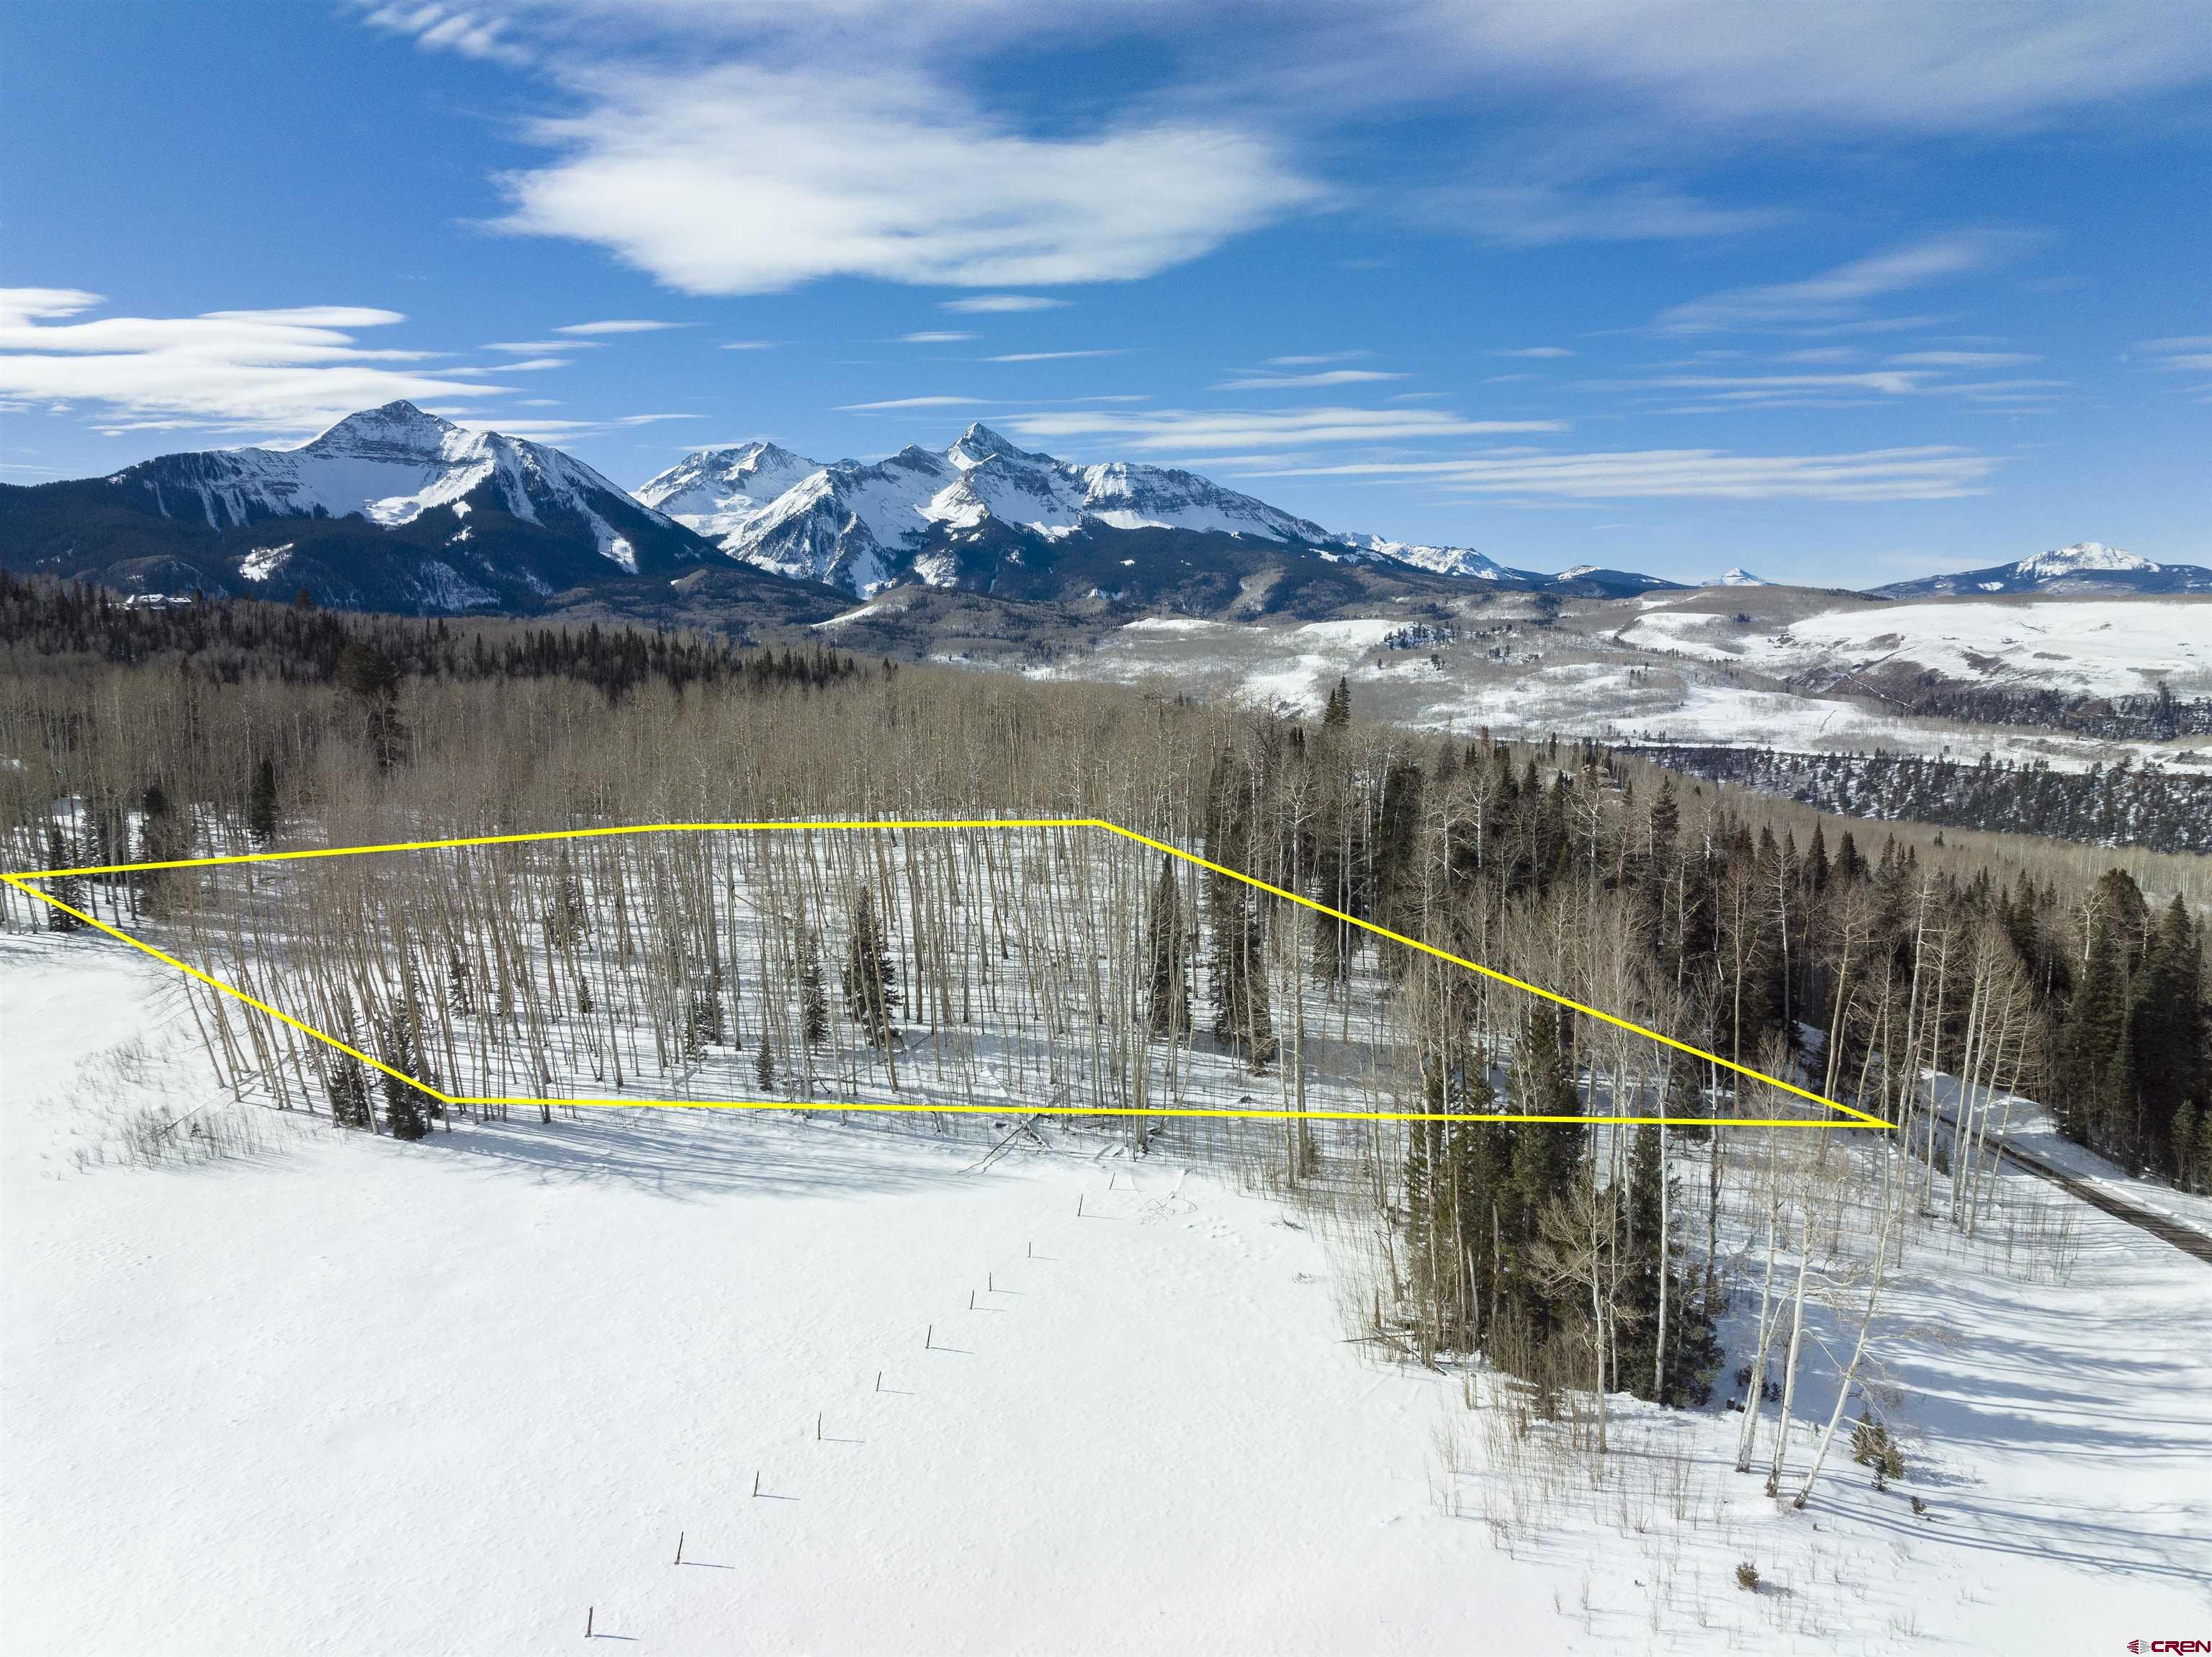 An oversized vacant parcel located in the gated community of Elk Run. One of the most desired homesites in the region, bordering the Elk Run open space (11.64 acres) making this already large homesite even more private. Elk Run is one of the Telluride region's most exclusive neighborhoods offering privacy with close proximity to Skiing, only 10 minutes. There are 2 tennis courts exclusively offered for owner usage within the community. With limited quality inventory for vacant land, this opportunity is a legacy holding that is destined to be a jaw dropper of a home in an incredible setting. Wildlife abounds and awaits!